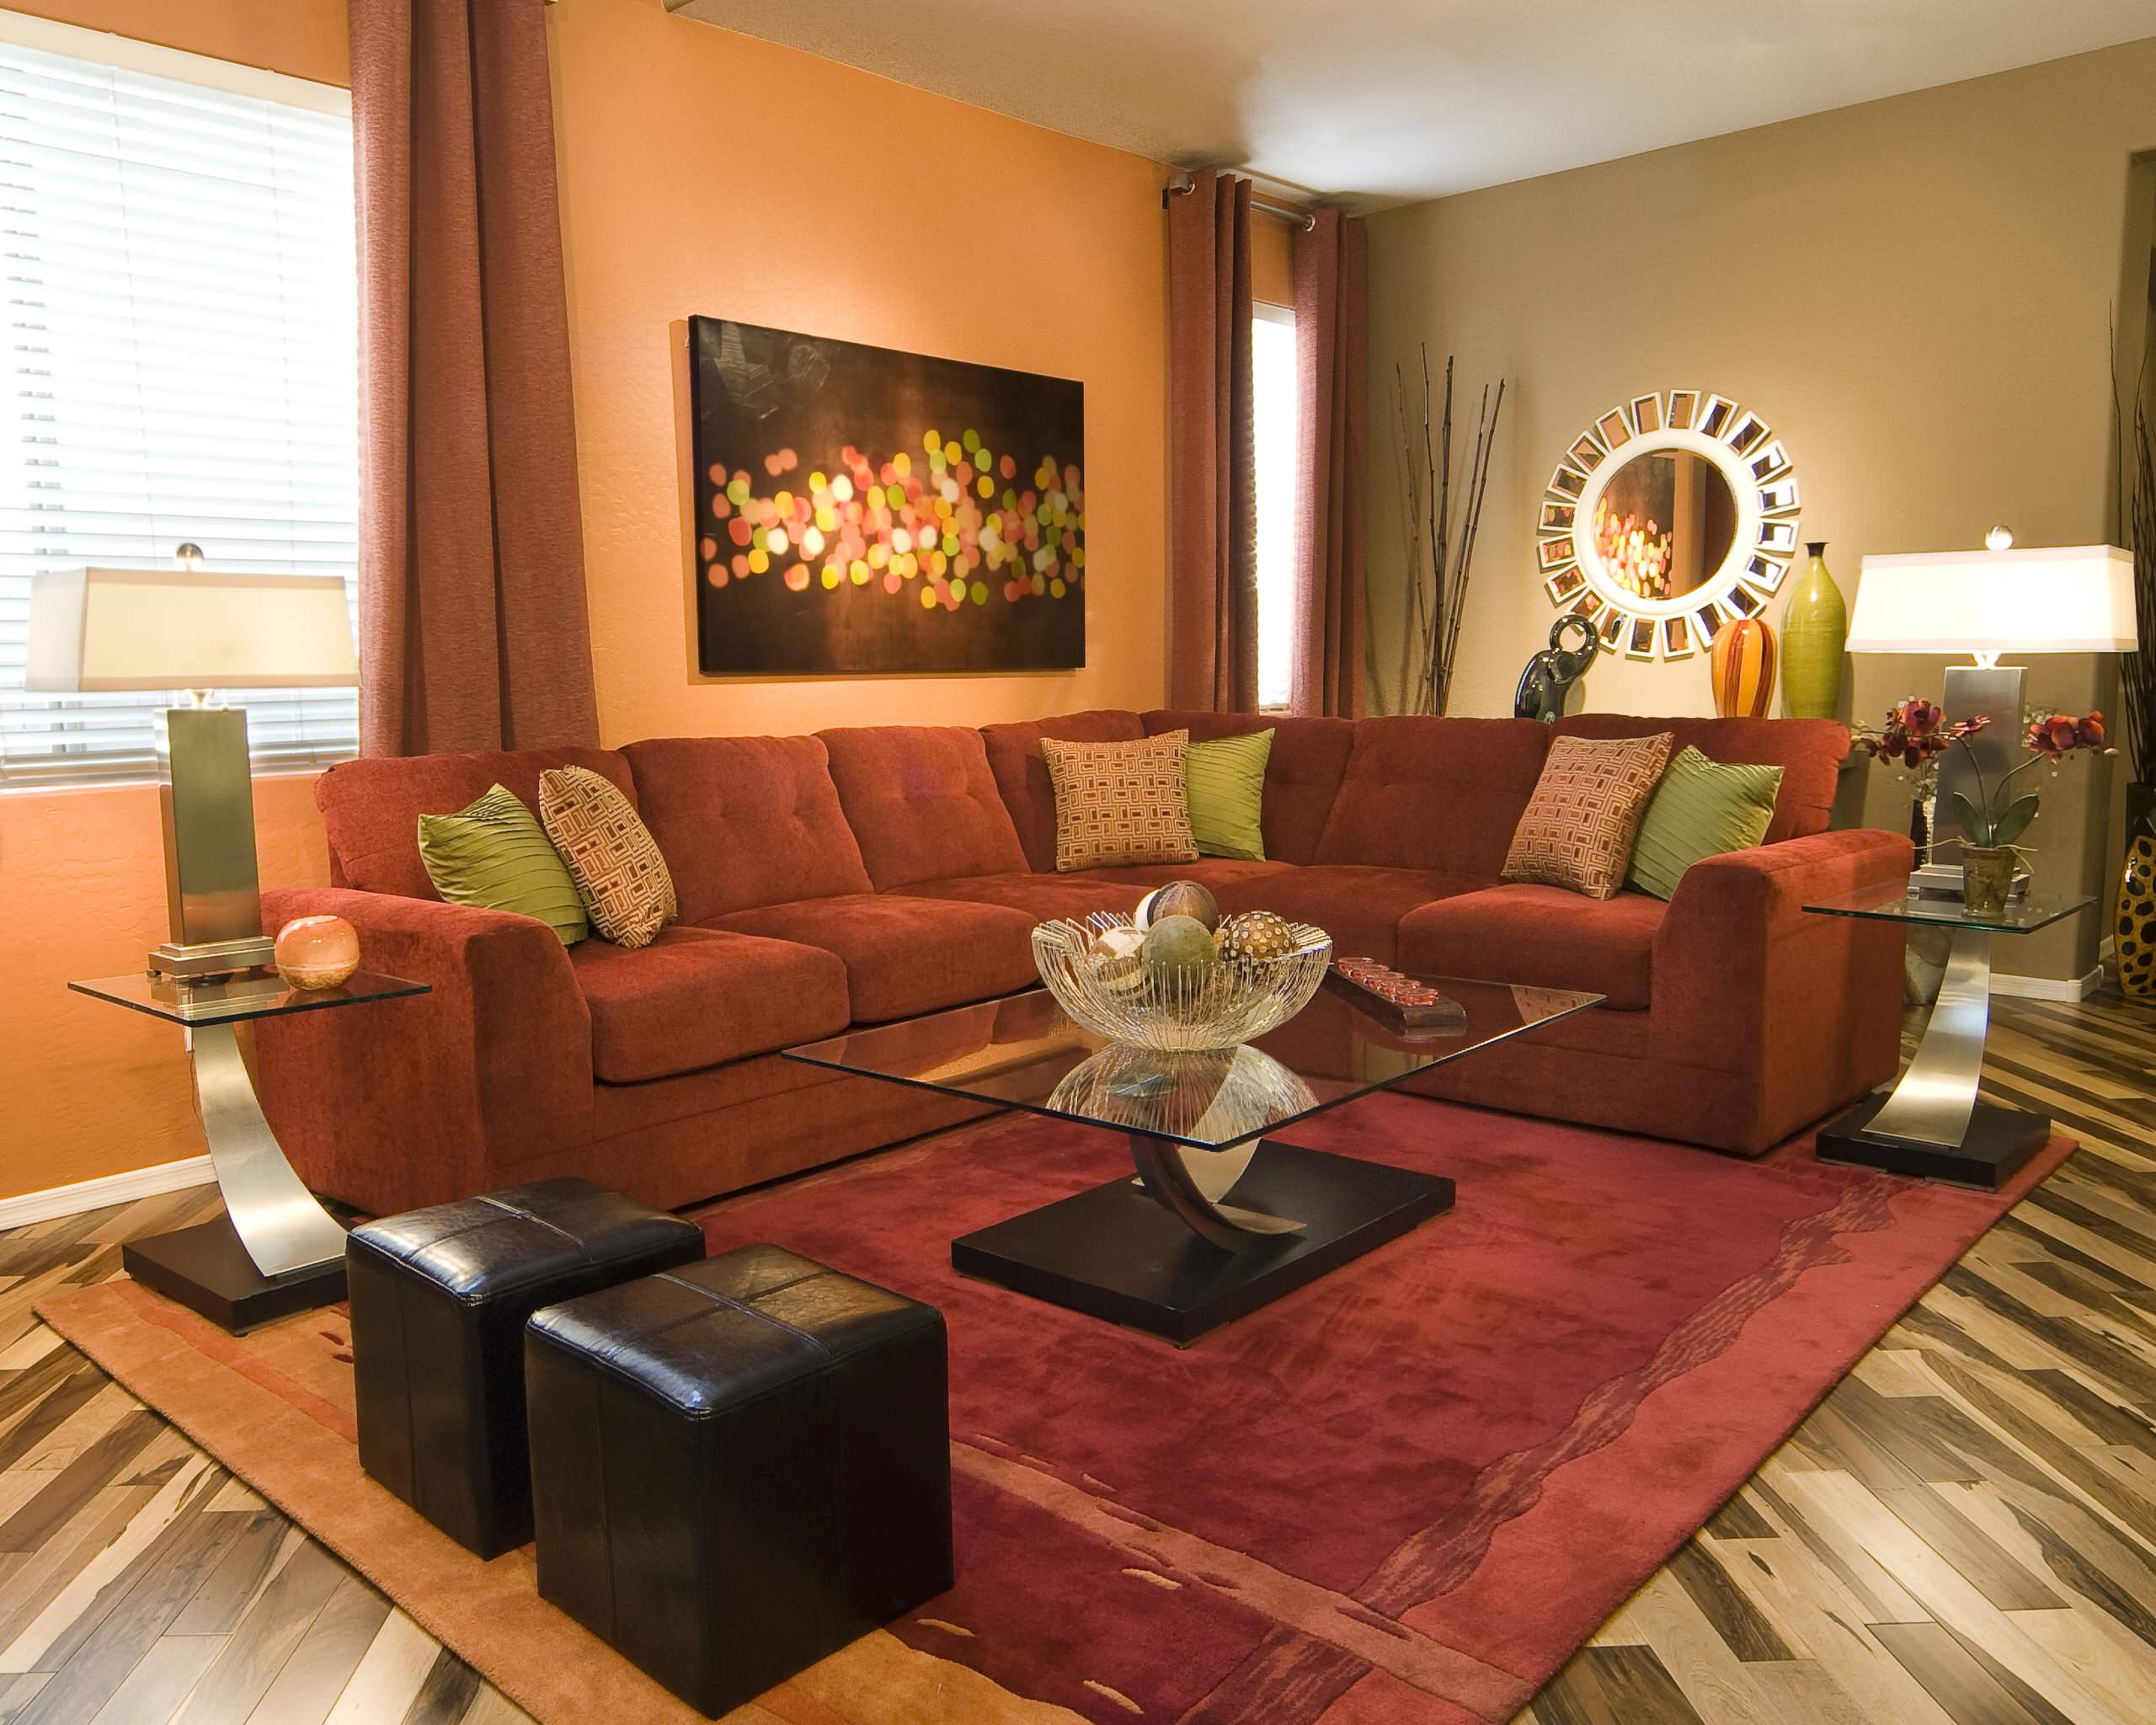 75 Beautiful Living Room with Orange Walls Ideas and Designs ...